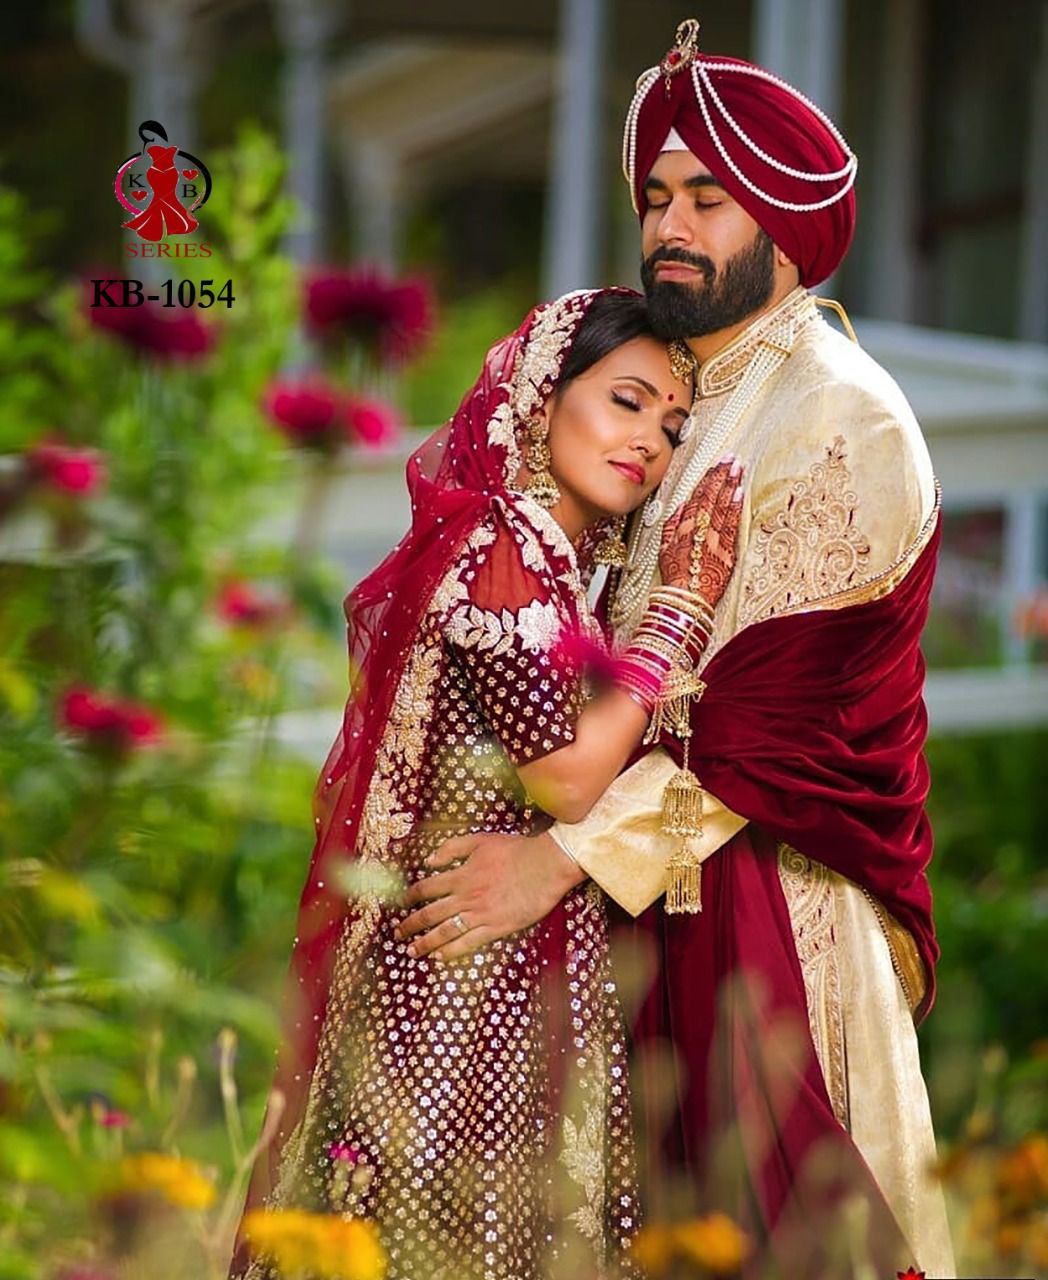 Pin by Pasupathy A on LOVELY COUPLE | Indian wedding poses, Wedding couple  poses photography, Wedding photoshoot poses